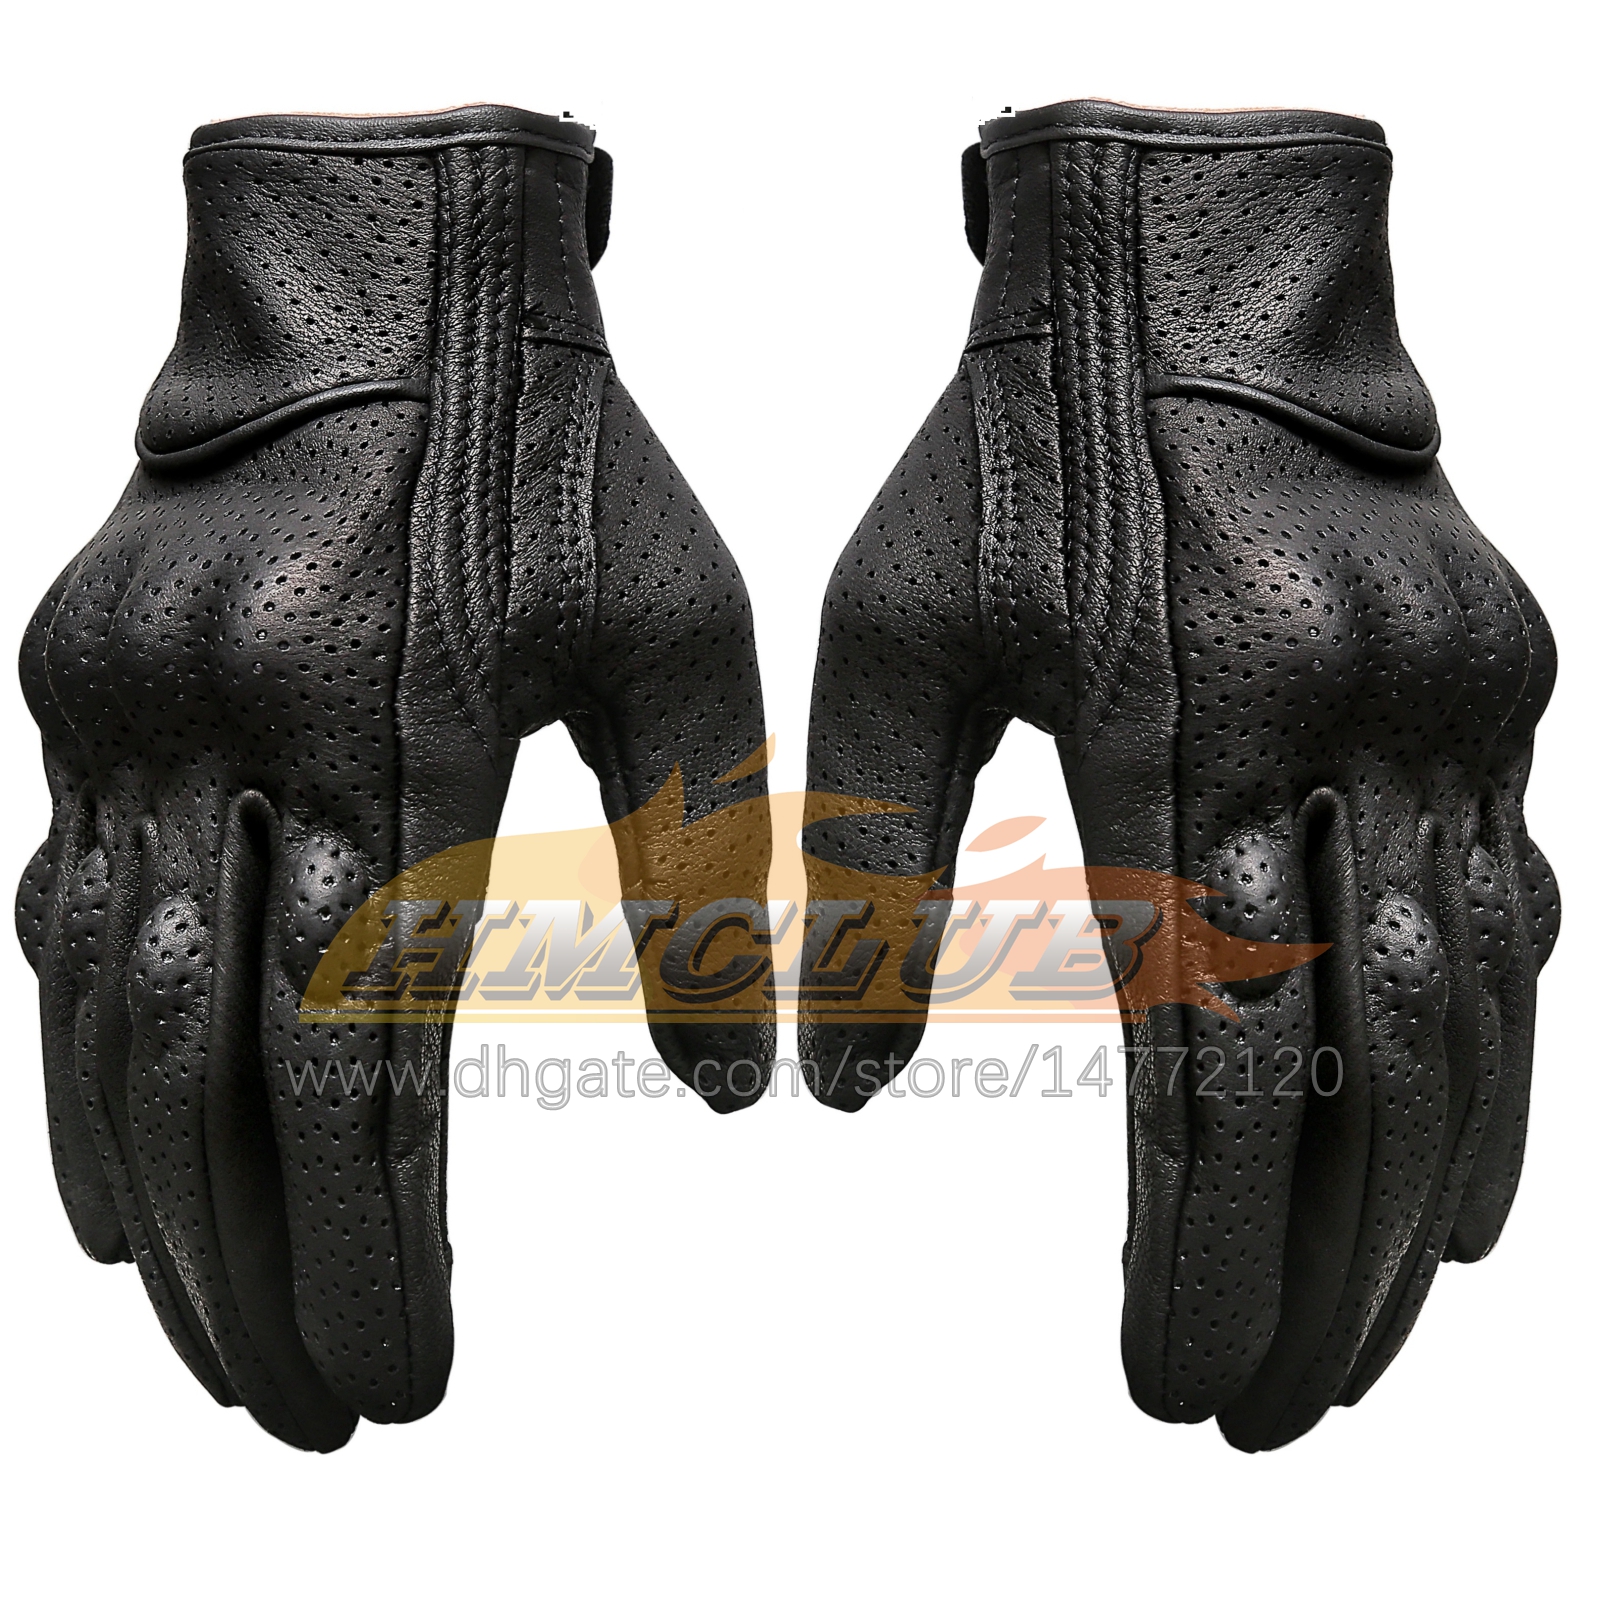 ST188 Genuine Goatskin Leather Motorcycle Gloves Motorbike Protective Gears Touch Screen Man Gift Cycling Glove Racing Guantes